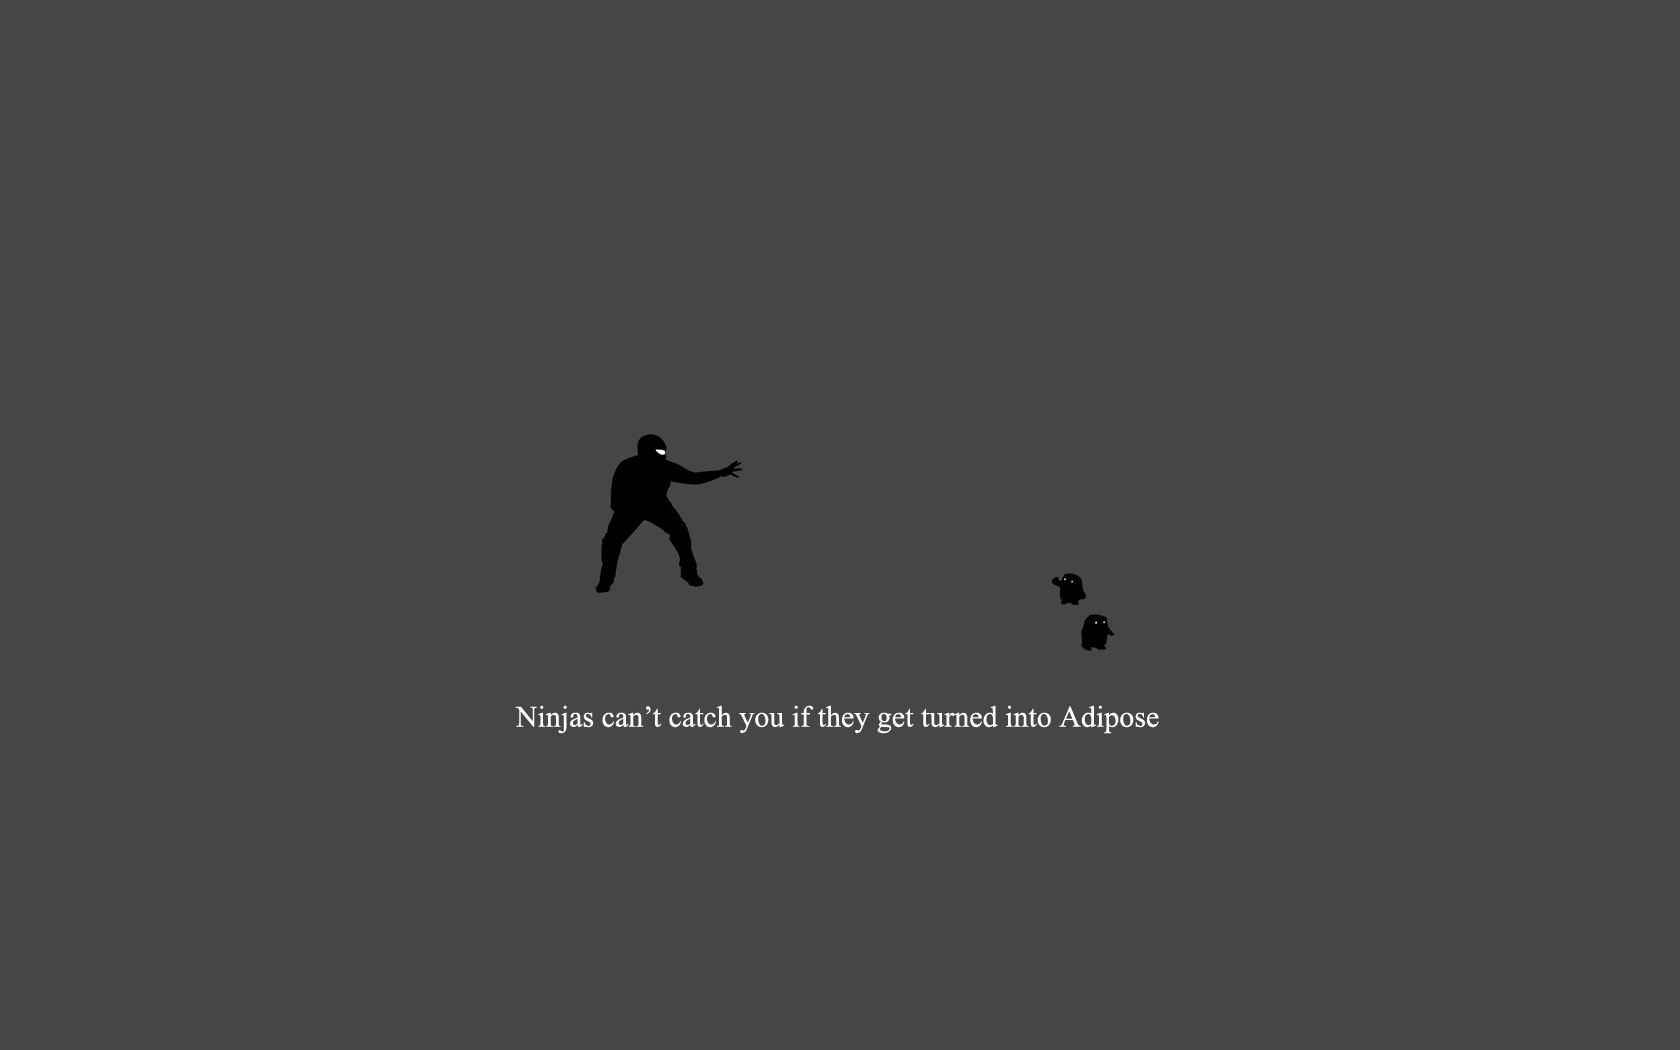 Funny Ninja Wallpaper. Expresses humor and features a skilled ninja in action.